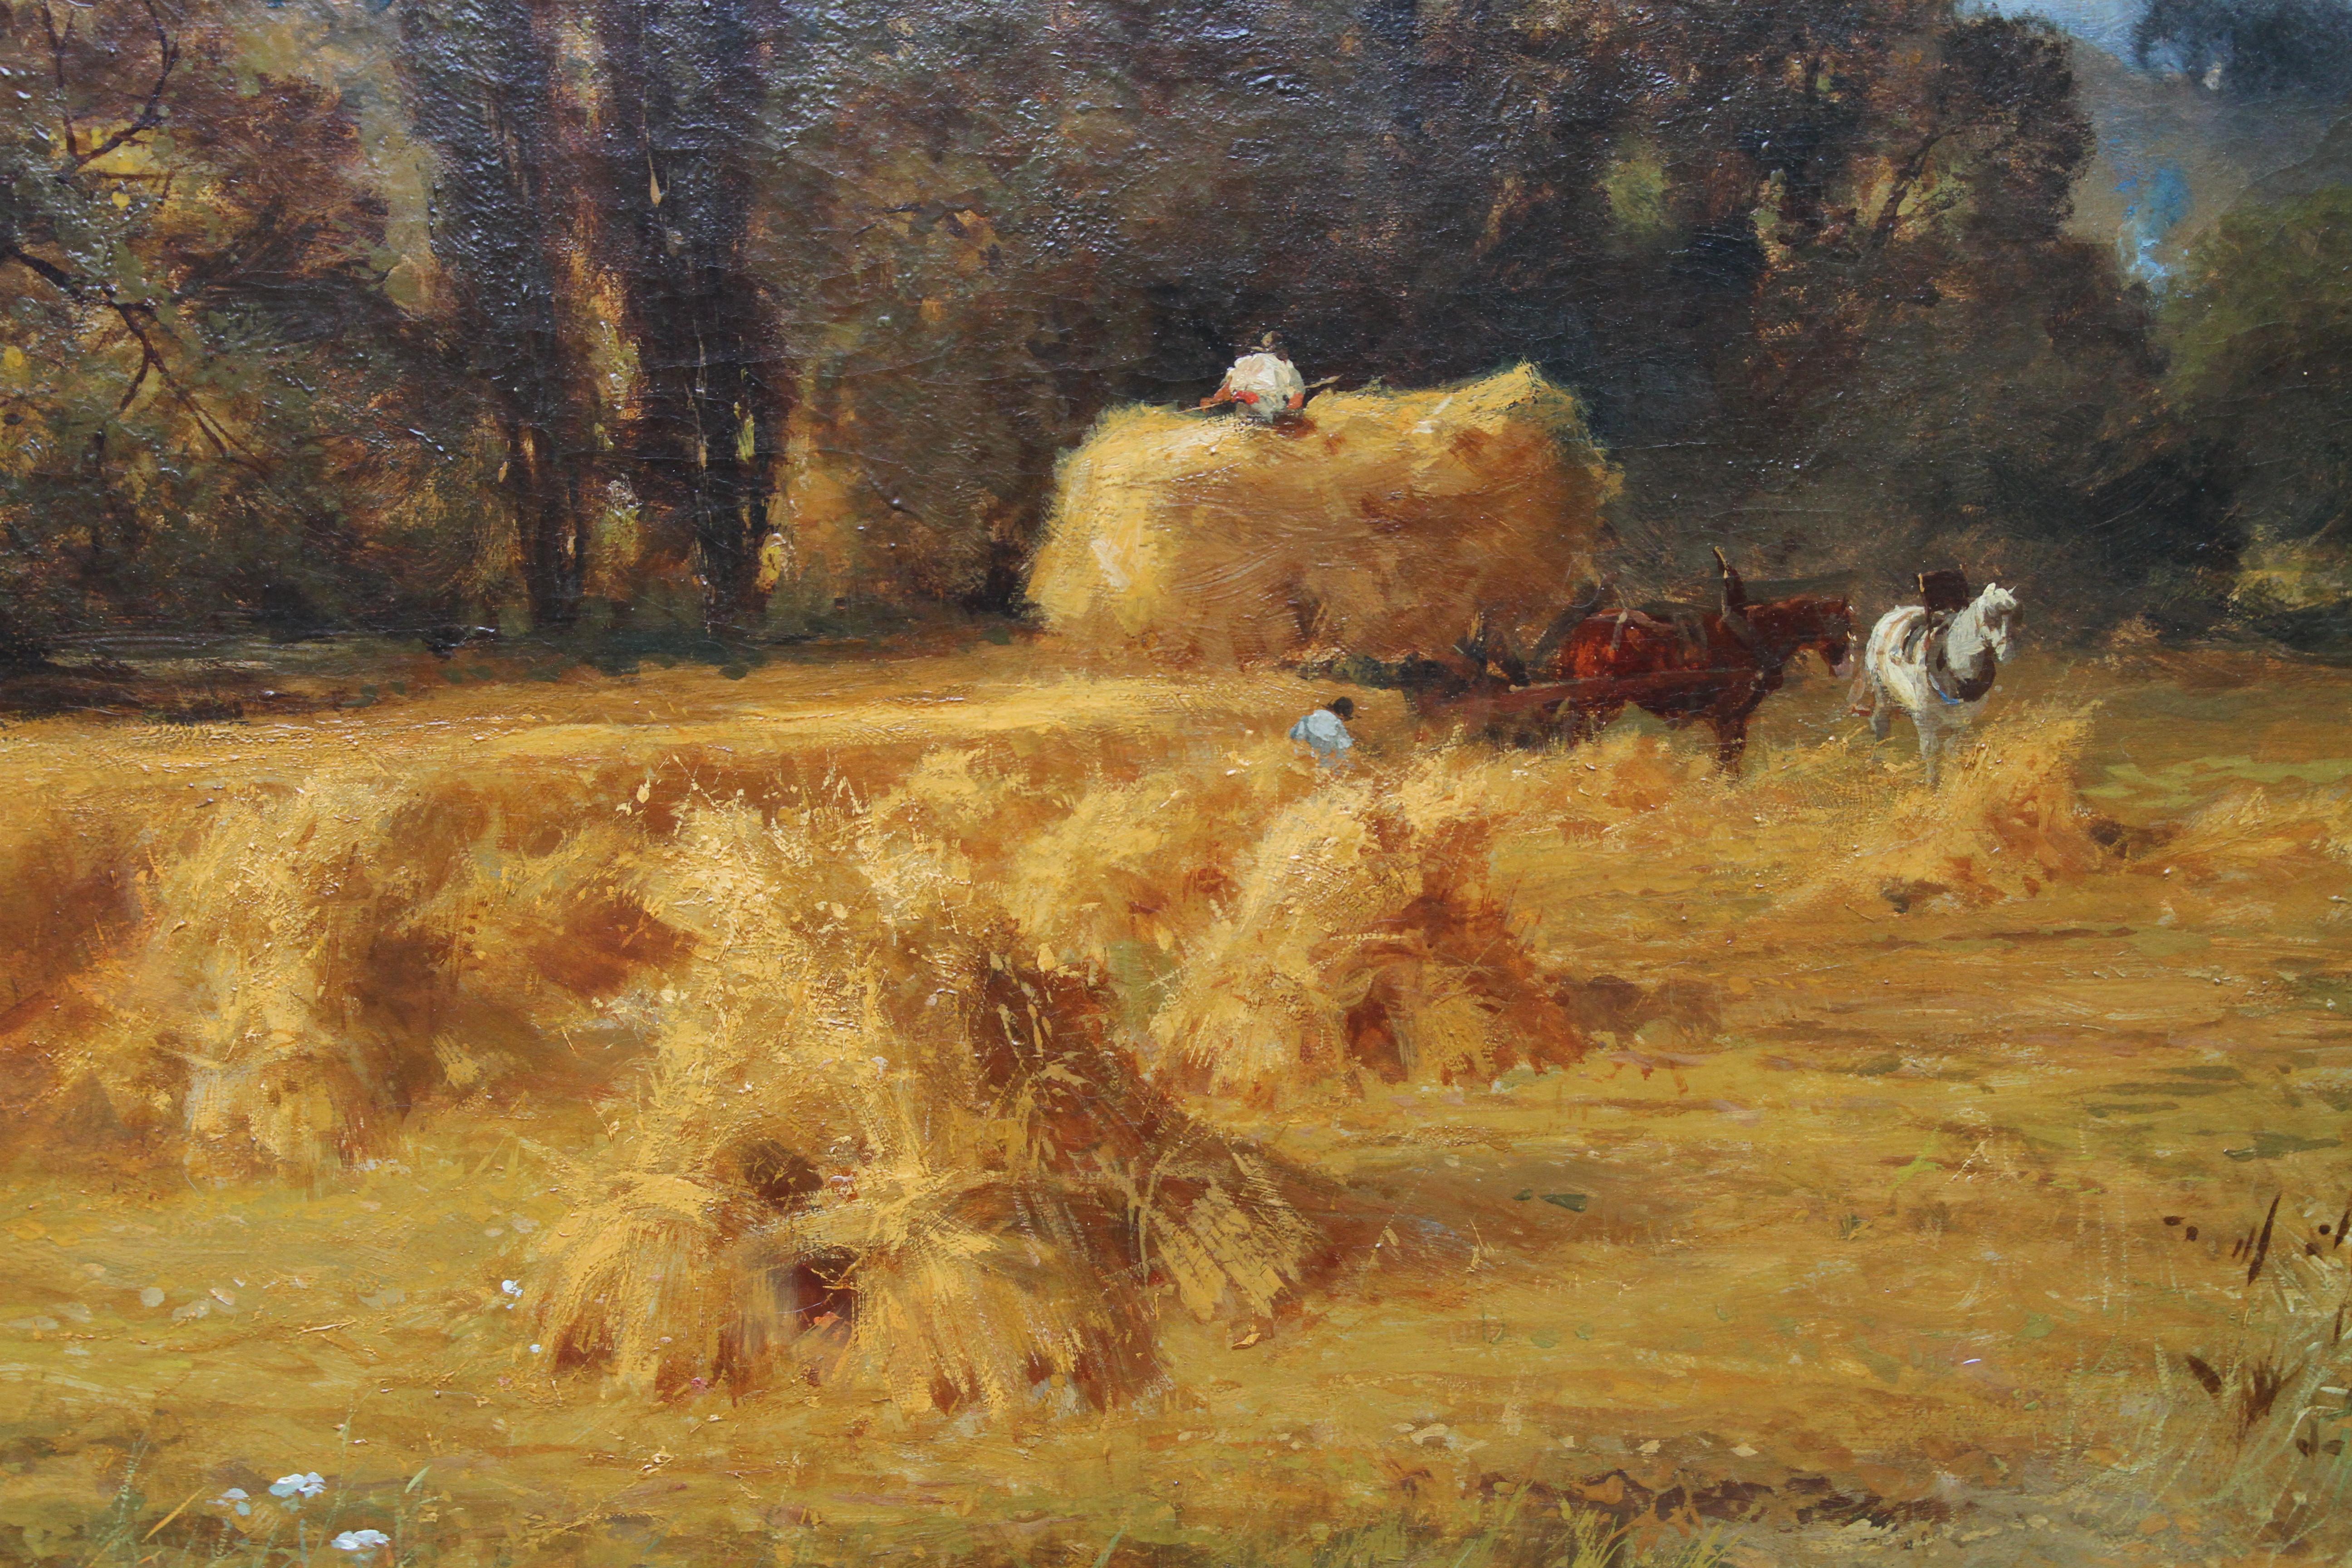 Harvest Time in Yorkshire - British art 19th century landscape oil painting For Sale 1